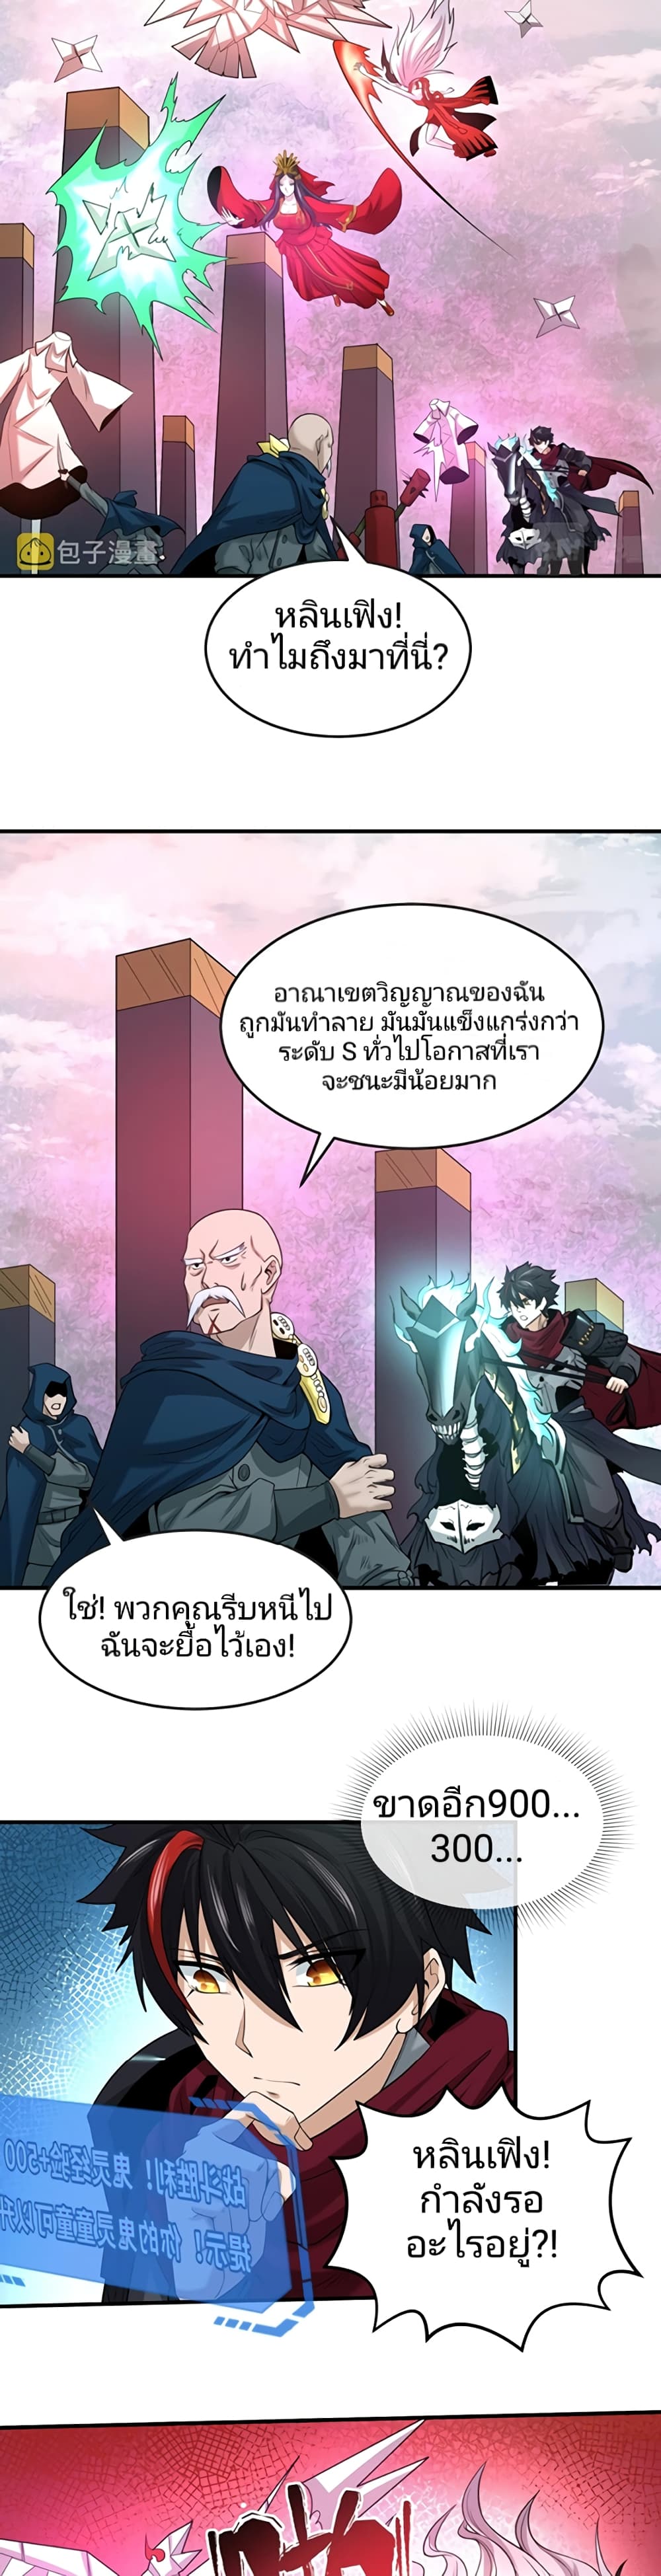 The Age of Ghost Spirits à¸à¸­à¸à¸à¸µà¹ 30 (26)